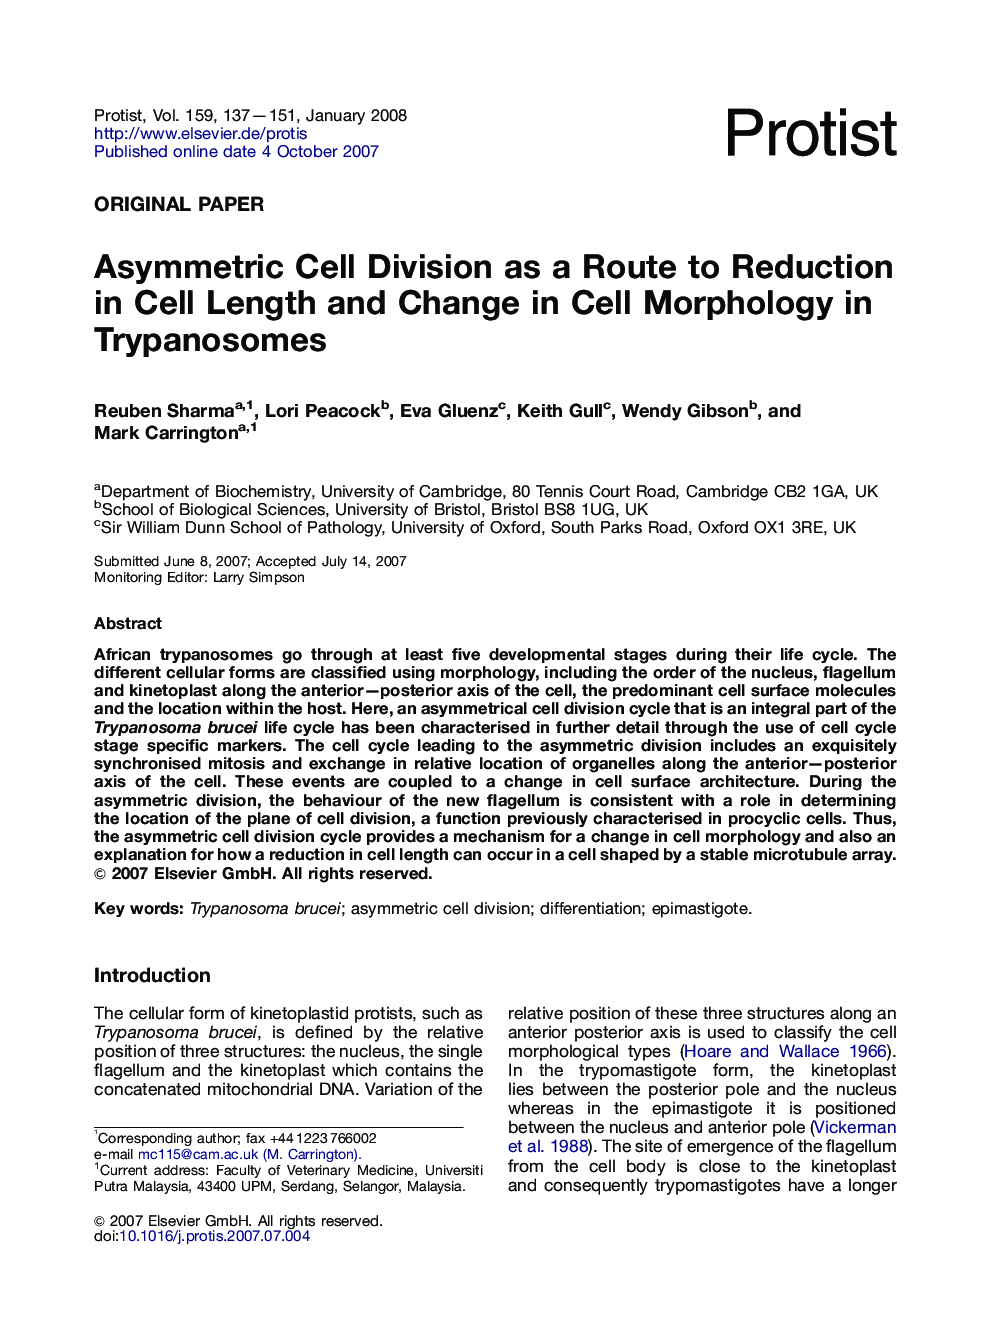 Asymmetric Cell Division as a Route to Reduction in Cell Length and Change in Cell Morphology in Trypanosomes